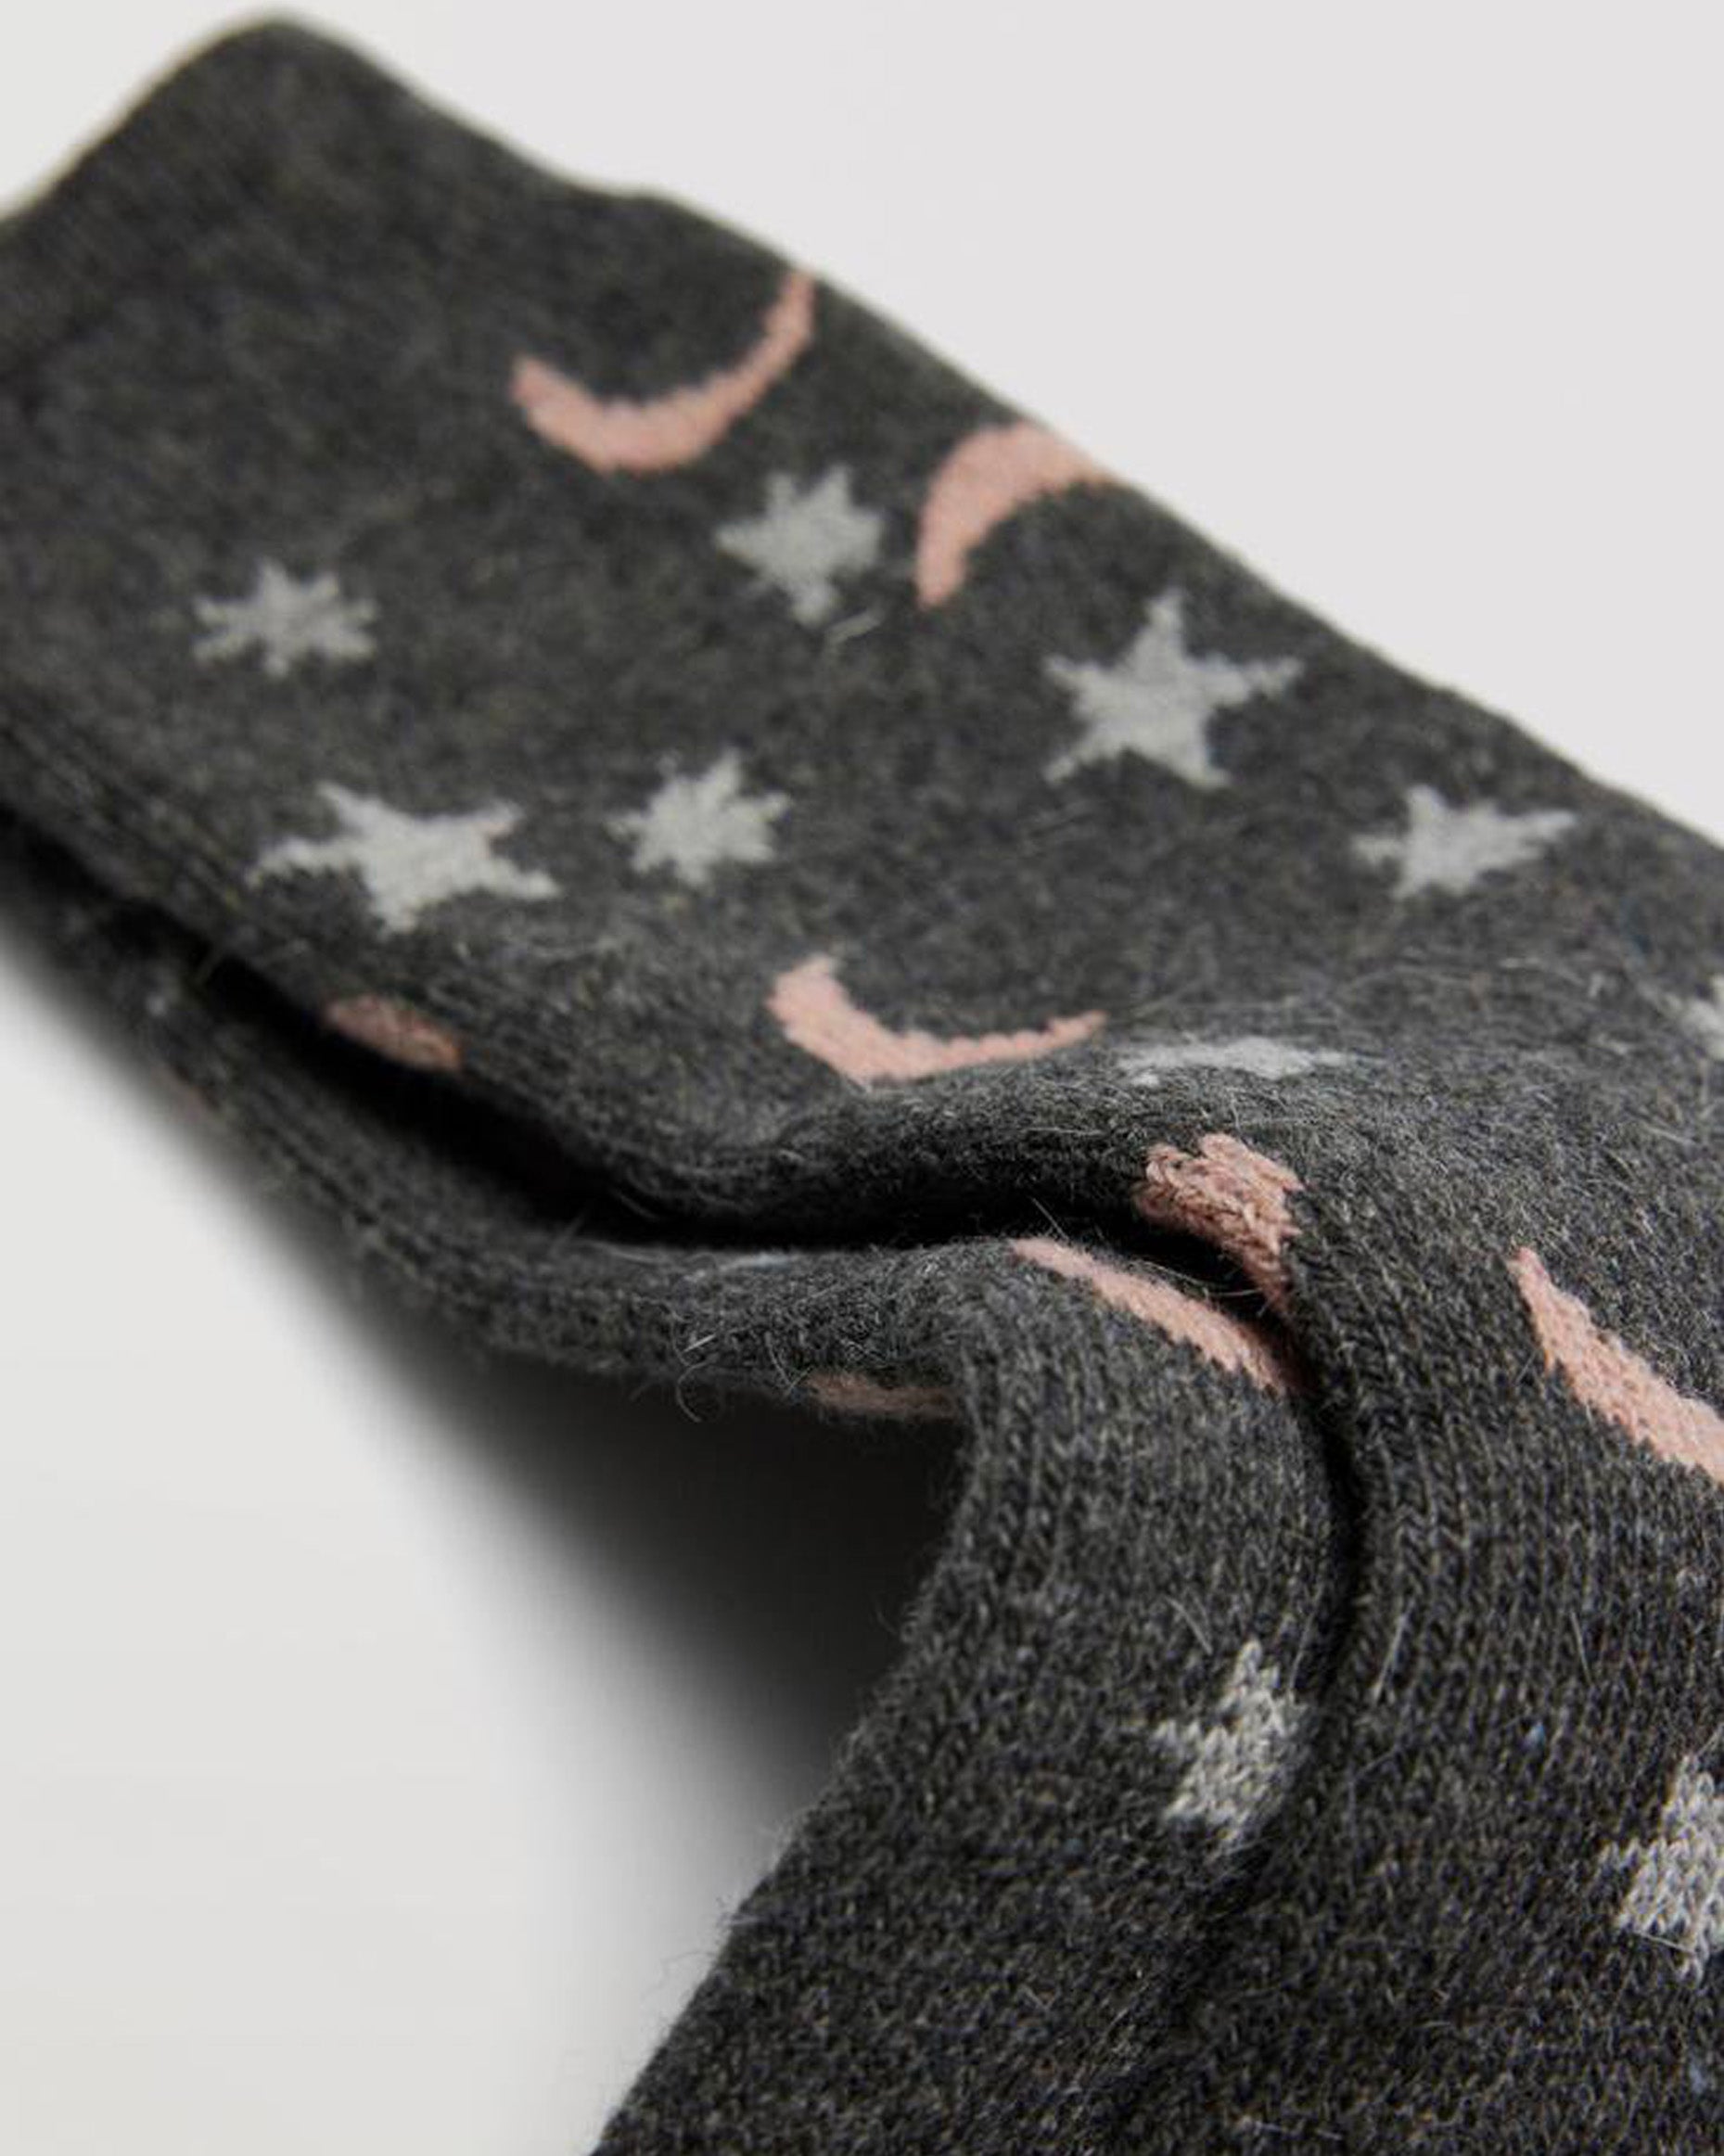 Ysabel Mora 12889 Stars & Moon Socks - Warm wool and angora mix dark grey thermal socks with a moon and star pattern in pale peach and light grey, shaped heel and deep elasticated comfort top.